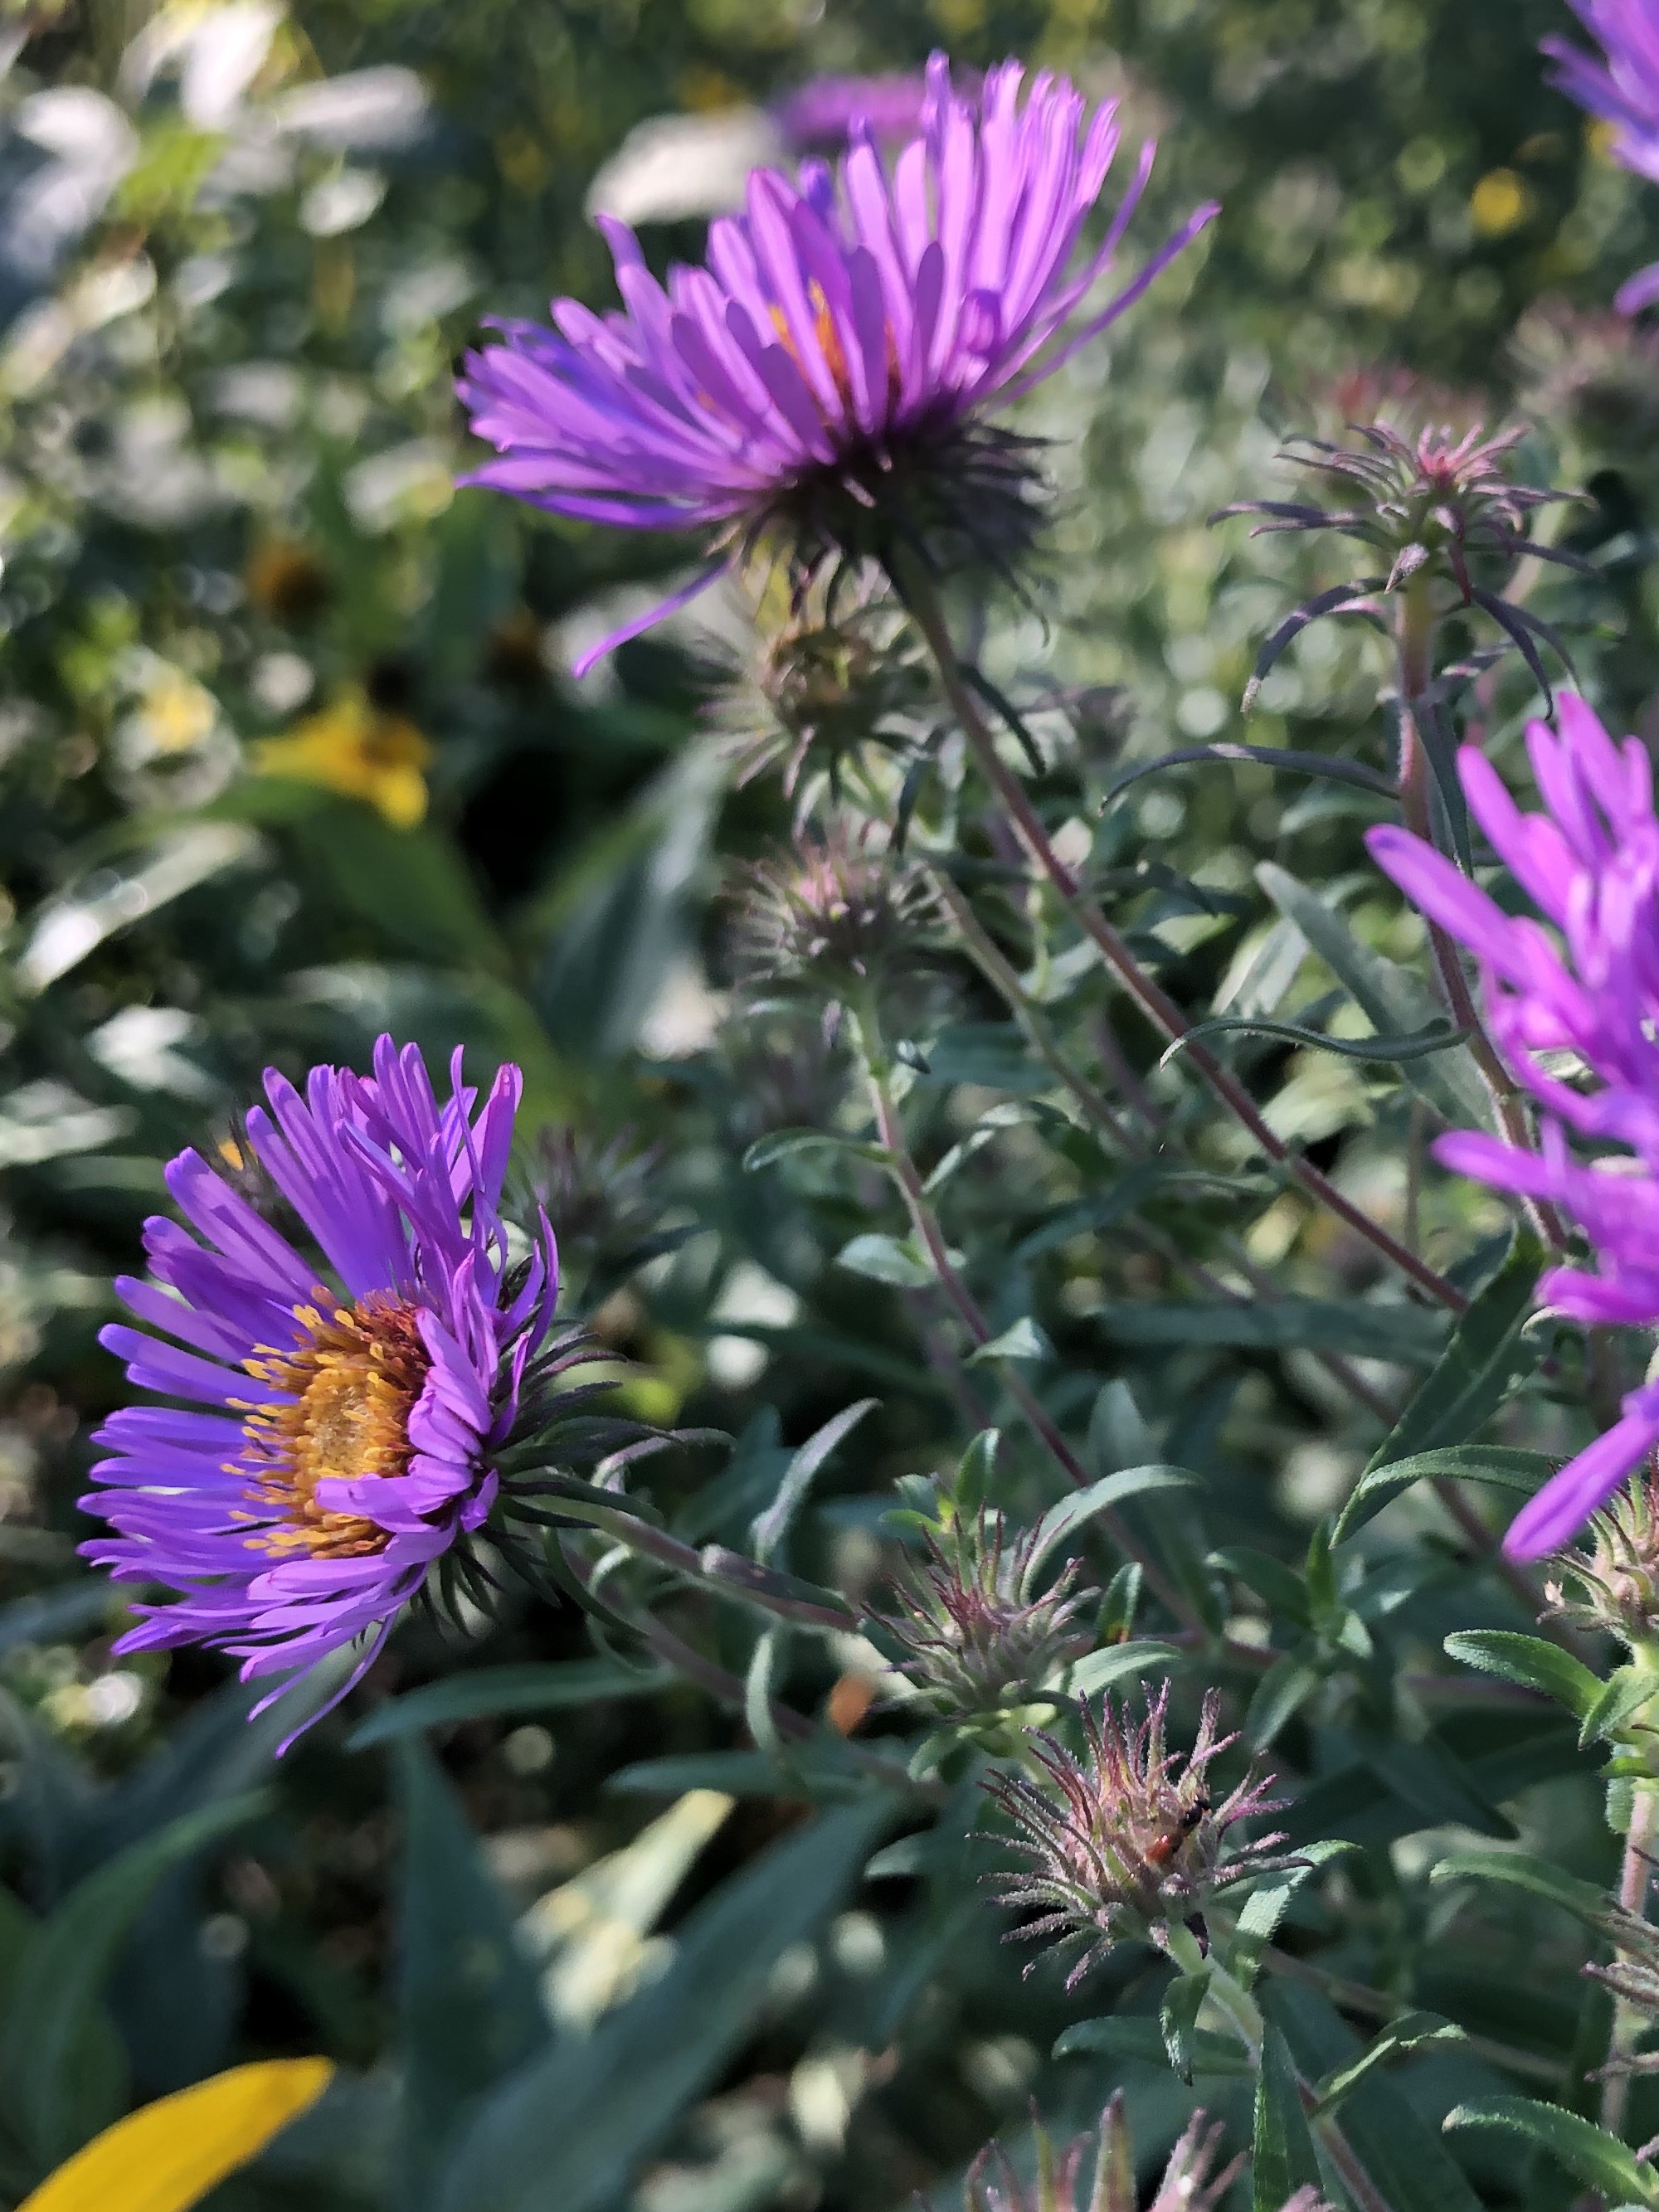 New England Aster on shore of Marion Dunn Pond in Madison, Wisconsin on September 8, 2019.